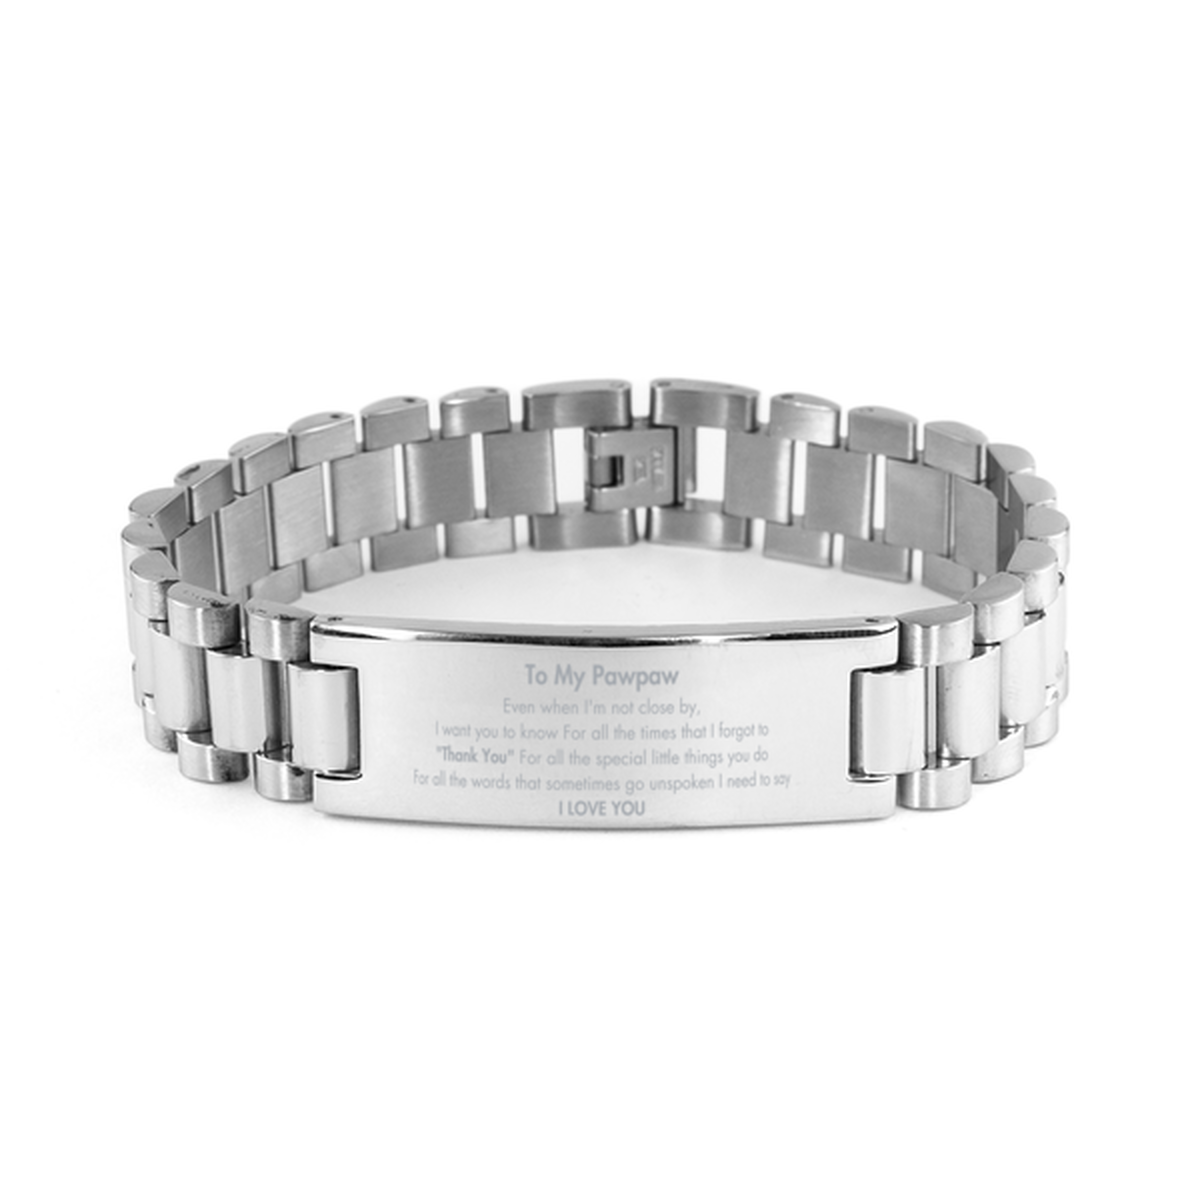 Thank You Gifts for Pawpaw, Keepsake Ladder Stainless Steel Bracelet Gifts for Pawpaw Birthday Mother's day Father's Day Pawpaw For all the words That sometimes go unspoken I need to say I LOVE YOU